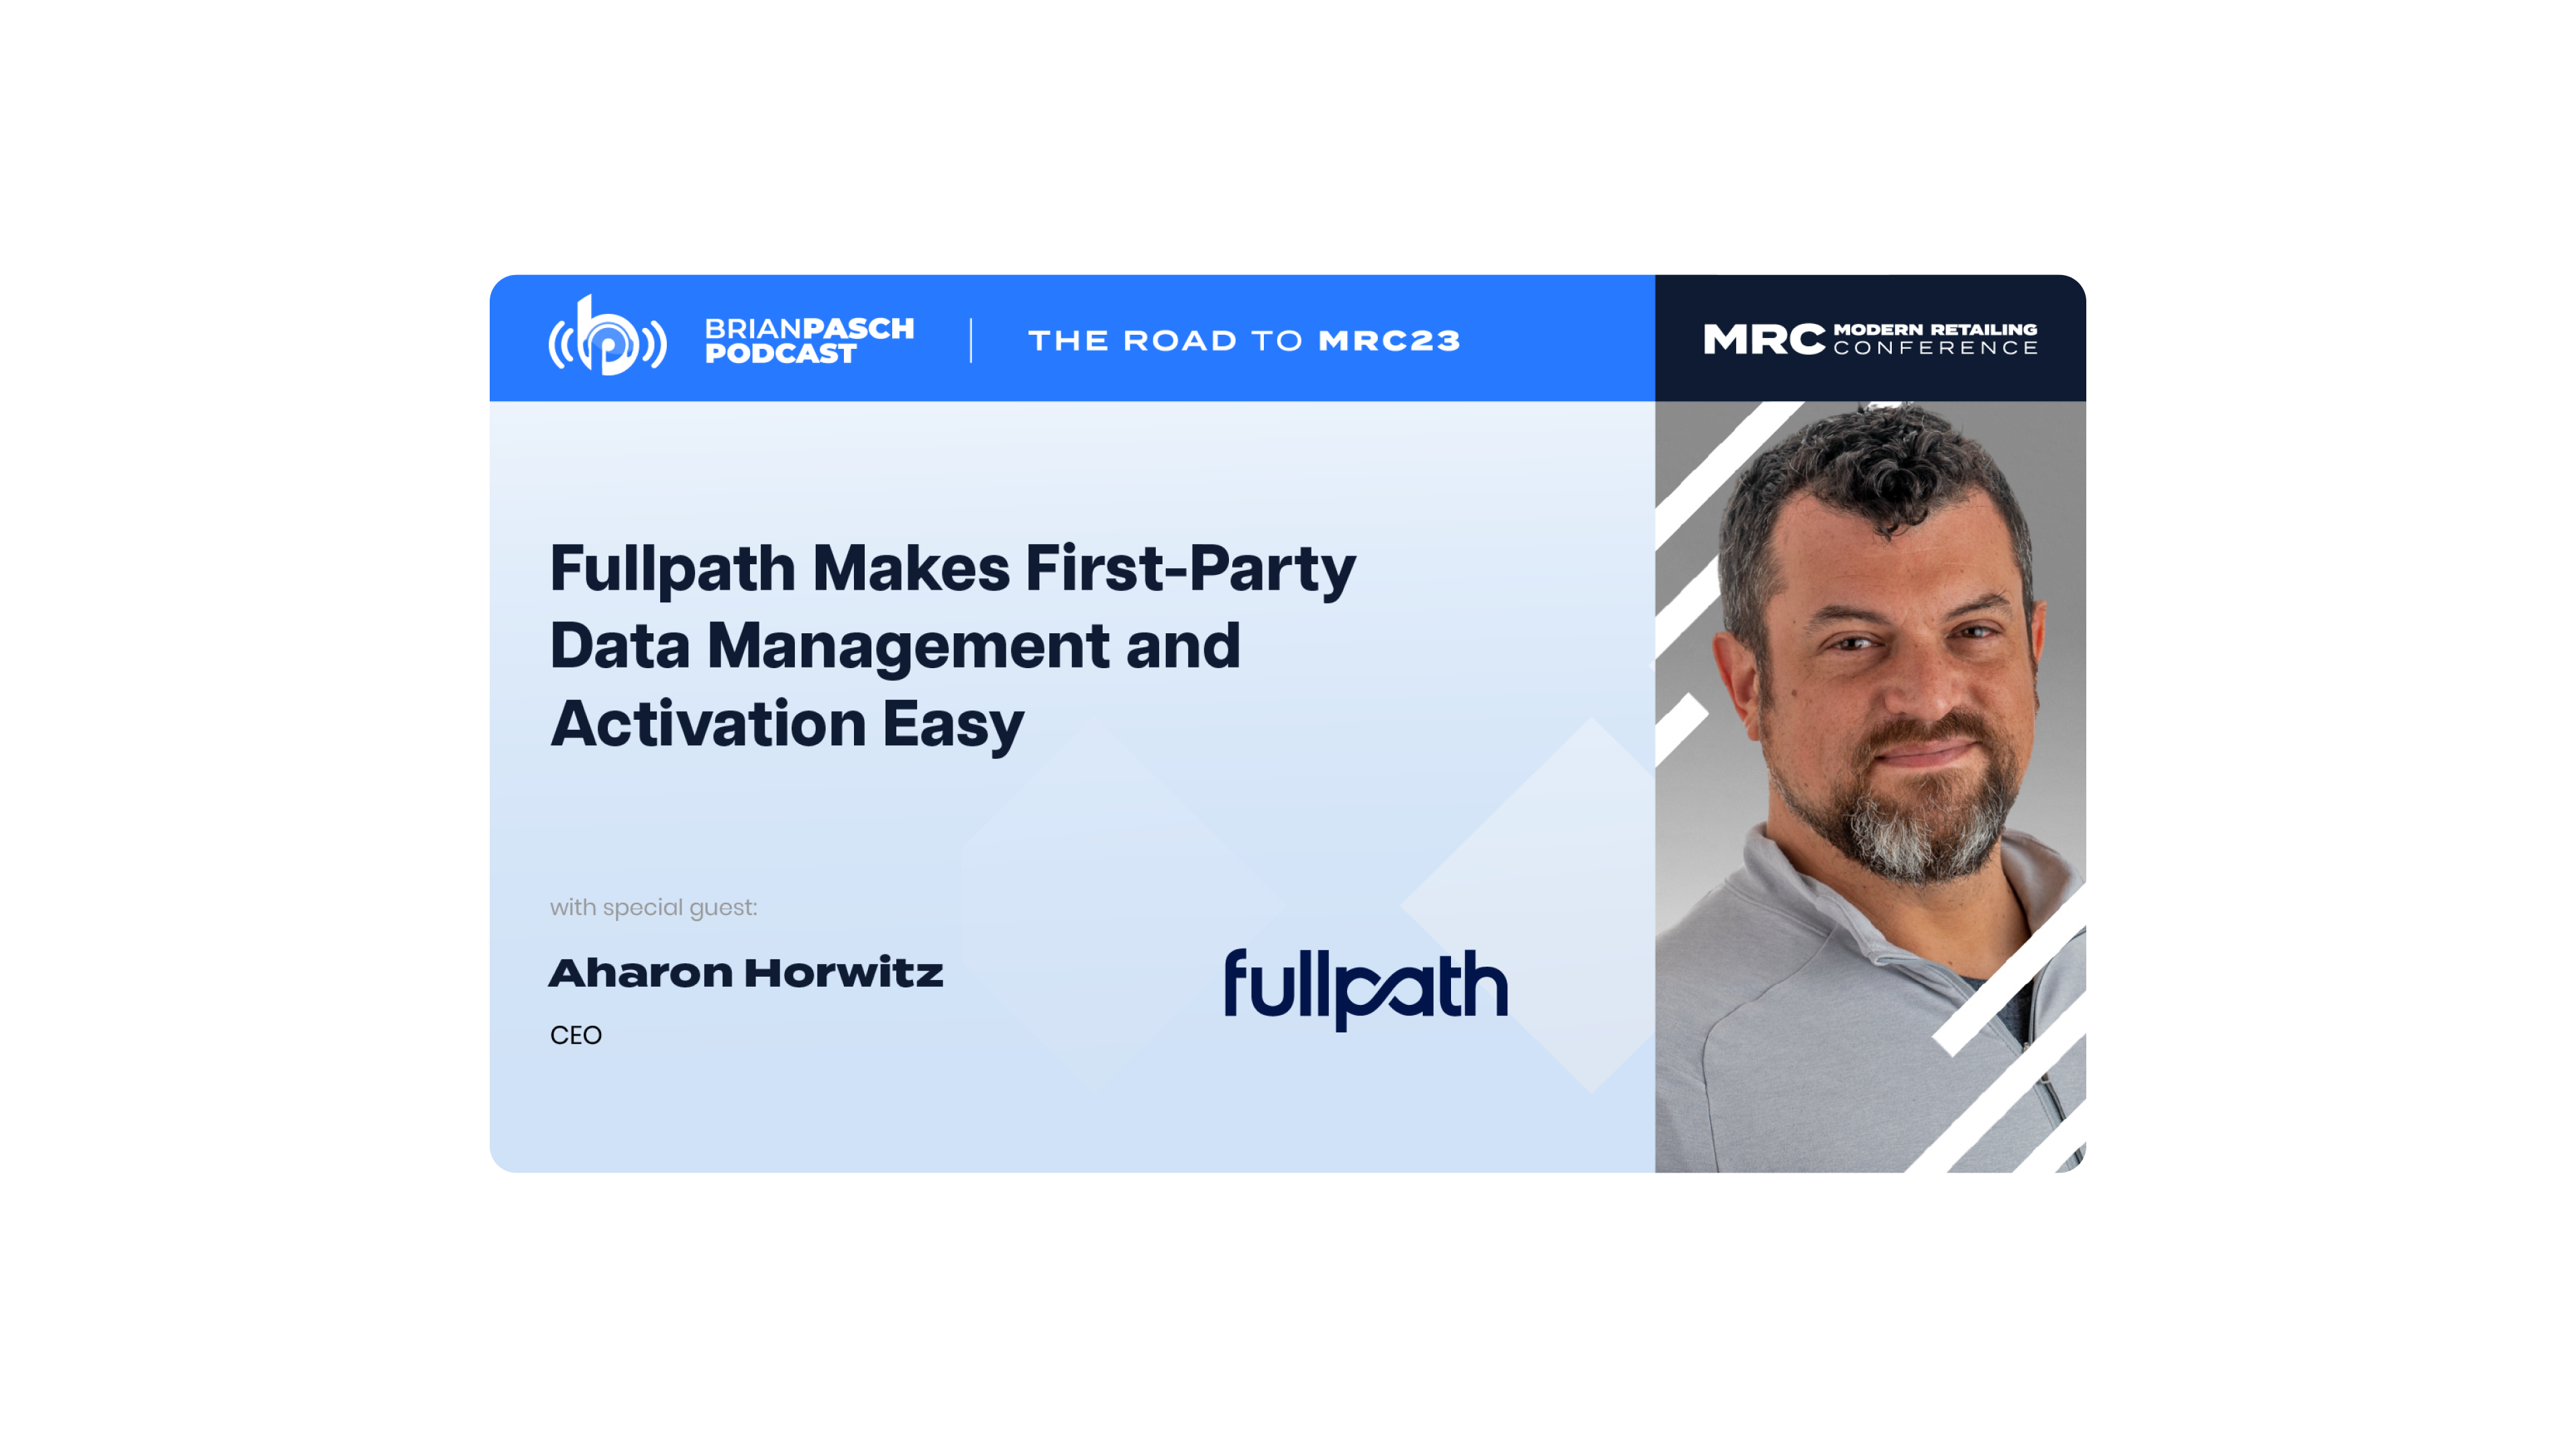 Fullpath Makes First-Party Data Management and Activation Easy